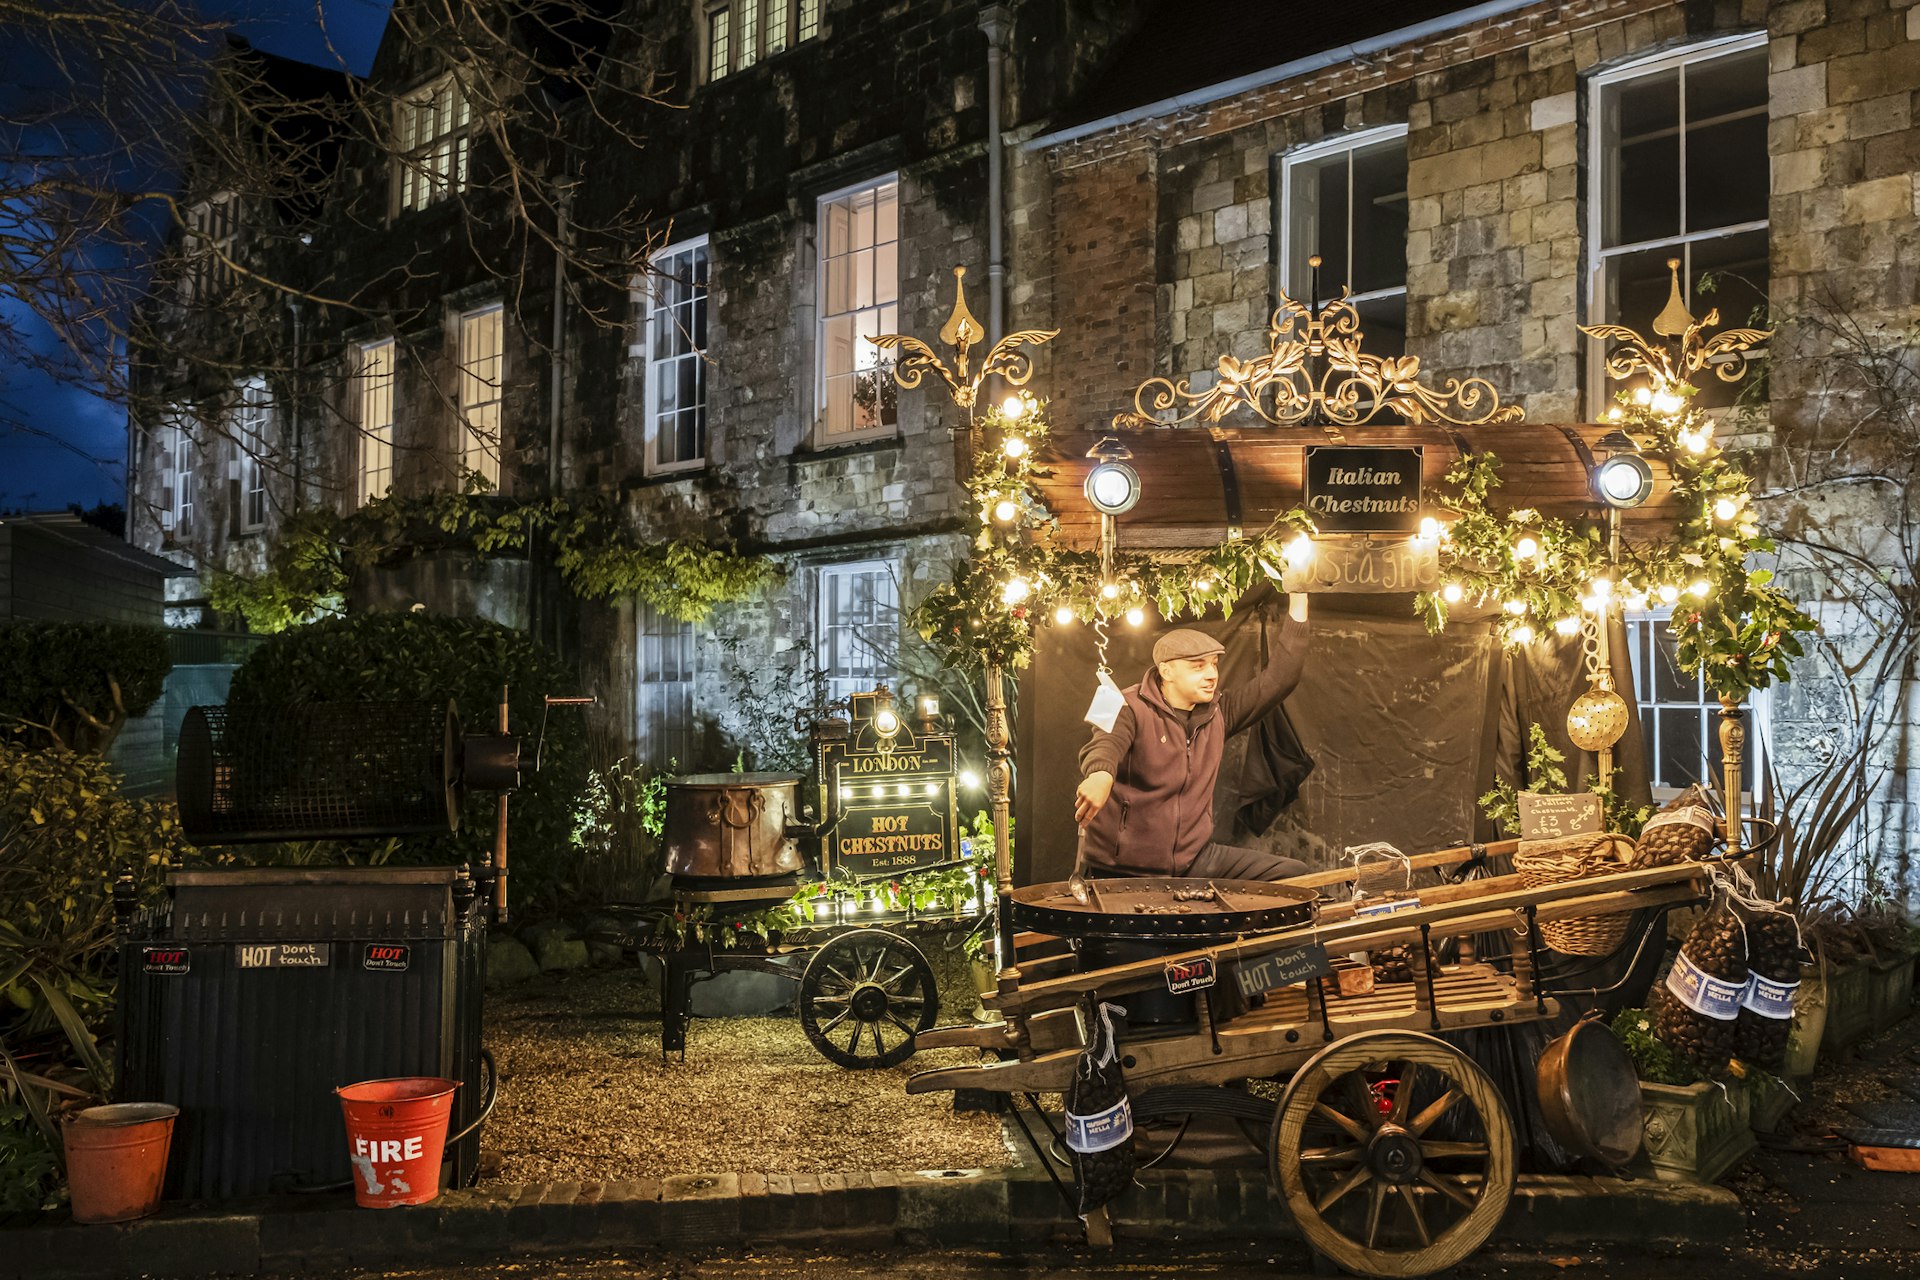 Vendor at his kiosk selling roasted chestnuts at the Christmas market set up at Winchester Cathedral.